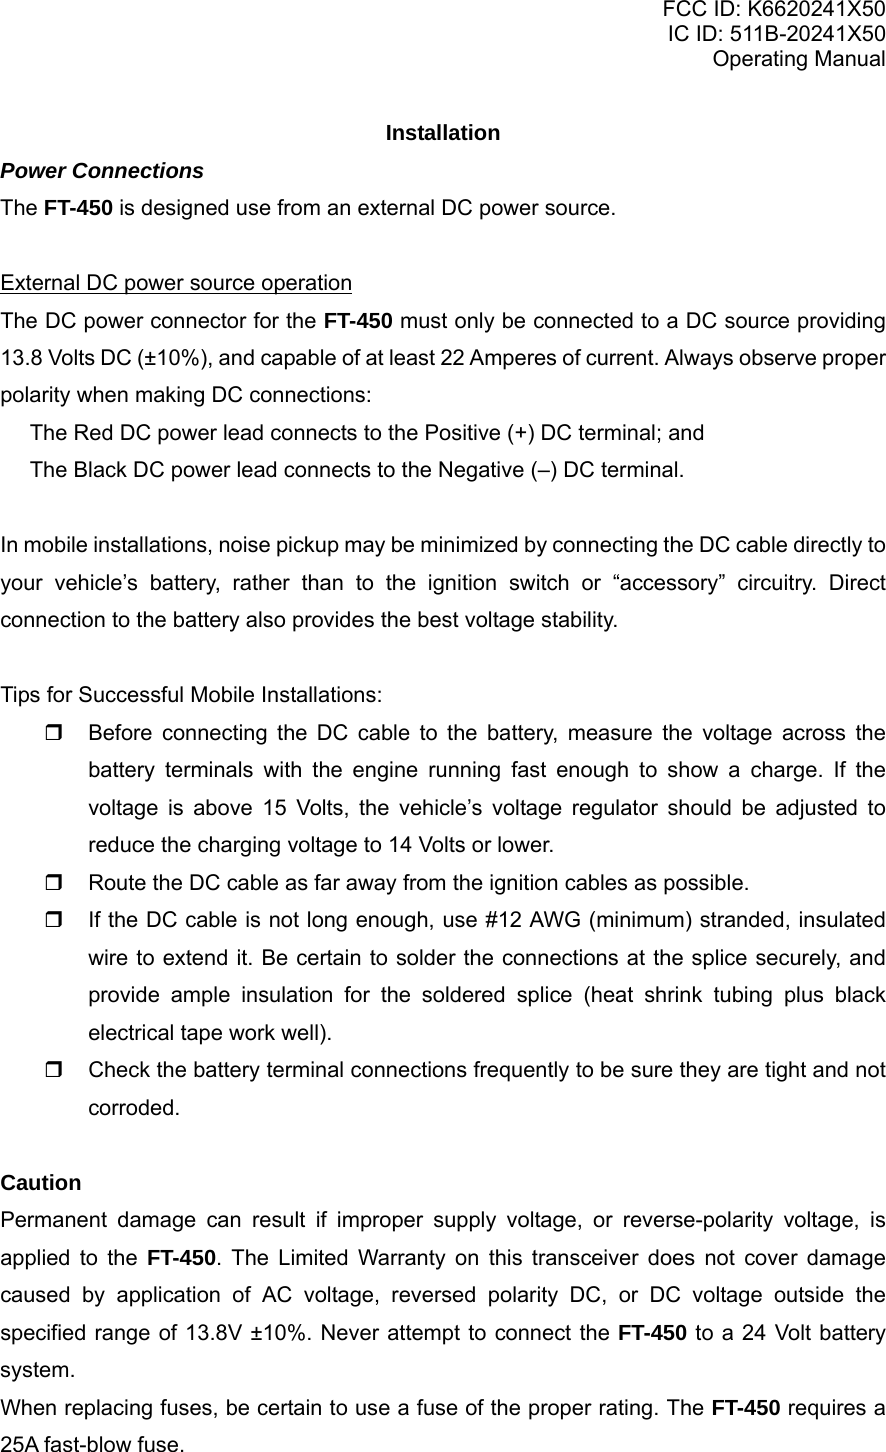 FCC ID: K6620241X50 IC ID: 511B-20241X50 Operating Manual Installation Power Connections The FT-450 is designed use from an external DC power source.  External DC power source operation The DC power connector for the FT-450 must only be connected to a DC source providing 13.8 Volts DC (±10%), and capable of at least 22 Amperes of current. Always observe proper polarity when making DC connections:   The Red DC power lead connects to the Positive (+) DC terminal; and   The Black DC power lead connects to the Negative (–) DC terminal.  In mobile installations, noise pickup may be minimized by connecting the DC cable directly to your vehicle’s battery, rather than to the ignition switch or “accessory” circuitry. Direct connection to the battery also provides the best voltage stability.  Tips for Successful Mobile Installations:   Before connecting the DC cable to the battery, measure the voltage across the battery terminals with the engine running fast enough to show a charge. If the voltage is above 15 Volts, the vehicle’s voltage regulator should be adjusted to reduce the charging voltage to 14 Volts or lower.   Route the DC cable as far away from the ignition cables as possible.   If the DC cable is not long enough, use #12 AWG (minimum) stranded, insulated wire to extend it. Be certain to solder the connections at the splice securely, and provide ample insulation for the soldered splice (heat shrink tubing plus black electrical tape work well).   Check the battery terminal connections frequently to be sure they are tight and not corroded.  Caution Permanent damage can result if improper supply voltage, or reverse-polarity voltage, is applied to the FT-450. The Limited Warranty on this transceiver does not cover damage caused by application of AC voltage, reversed polarity DC, or DC voltage outside the specified range of 13.8V ±10%. Never attempt to connect the FT-450 to a 24 Volt battery system. When replacing fuses, be certain to use a fuse of the proper rating. The FT-450 requires a 25A fast-blow fuse. Vertex Standard Co., Ltd. 4 